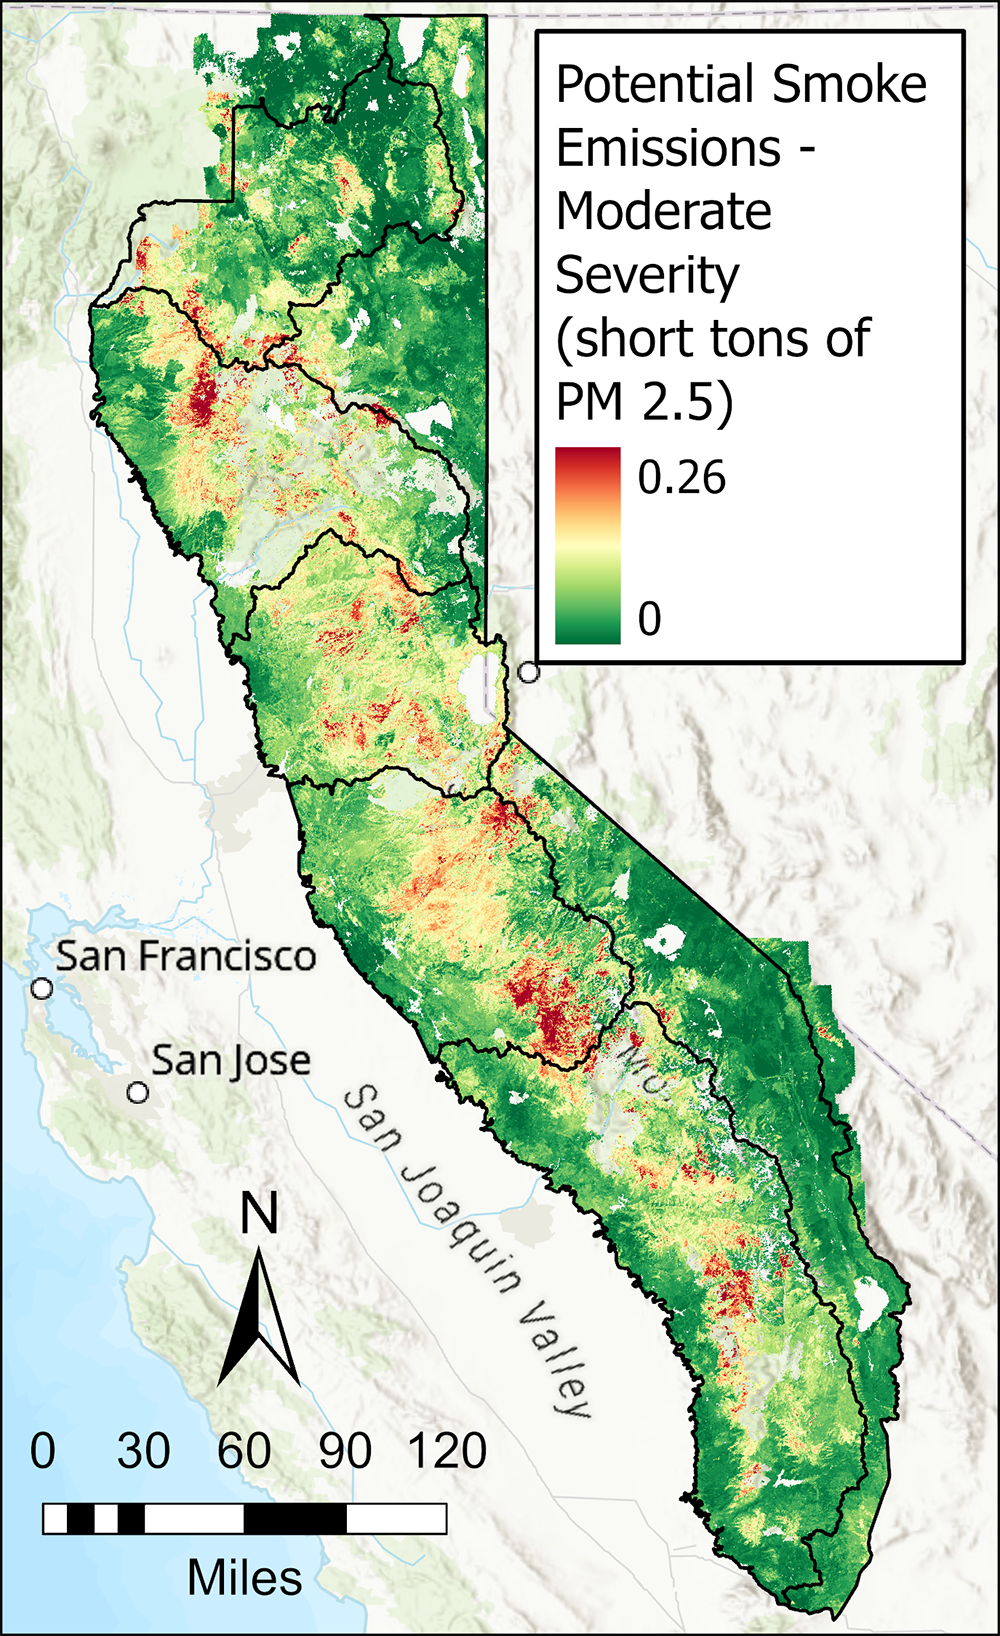 Potential Smoke Emissions - Moderate Severity on Map of California